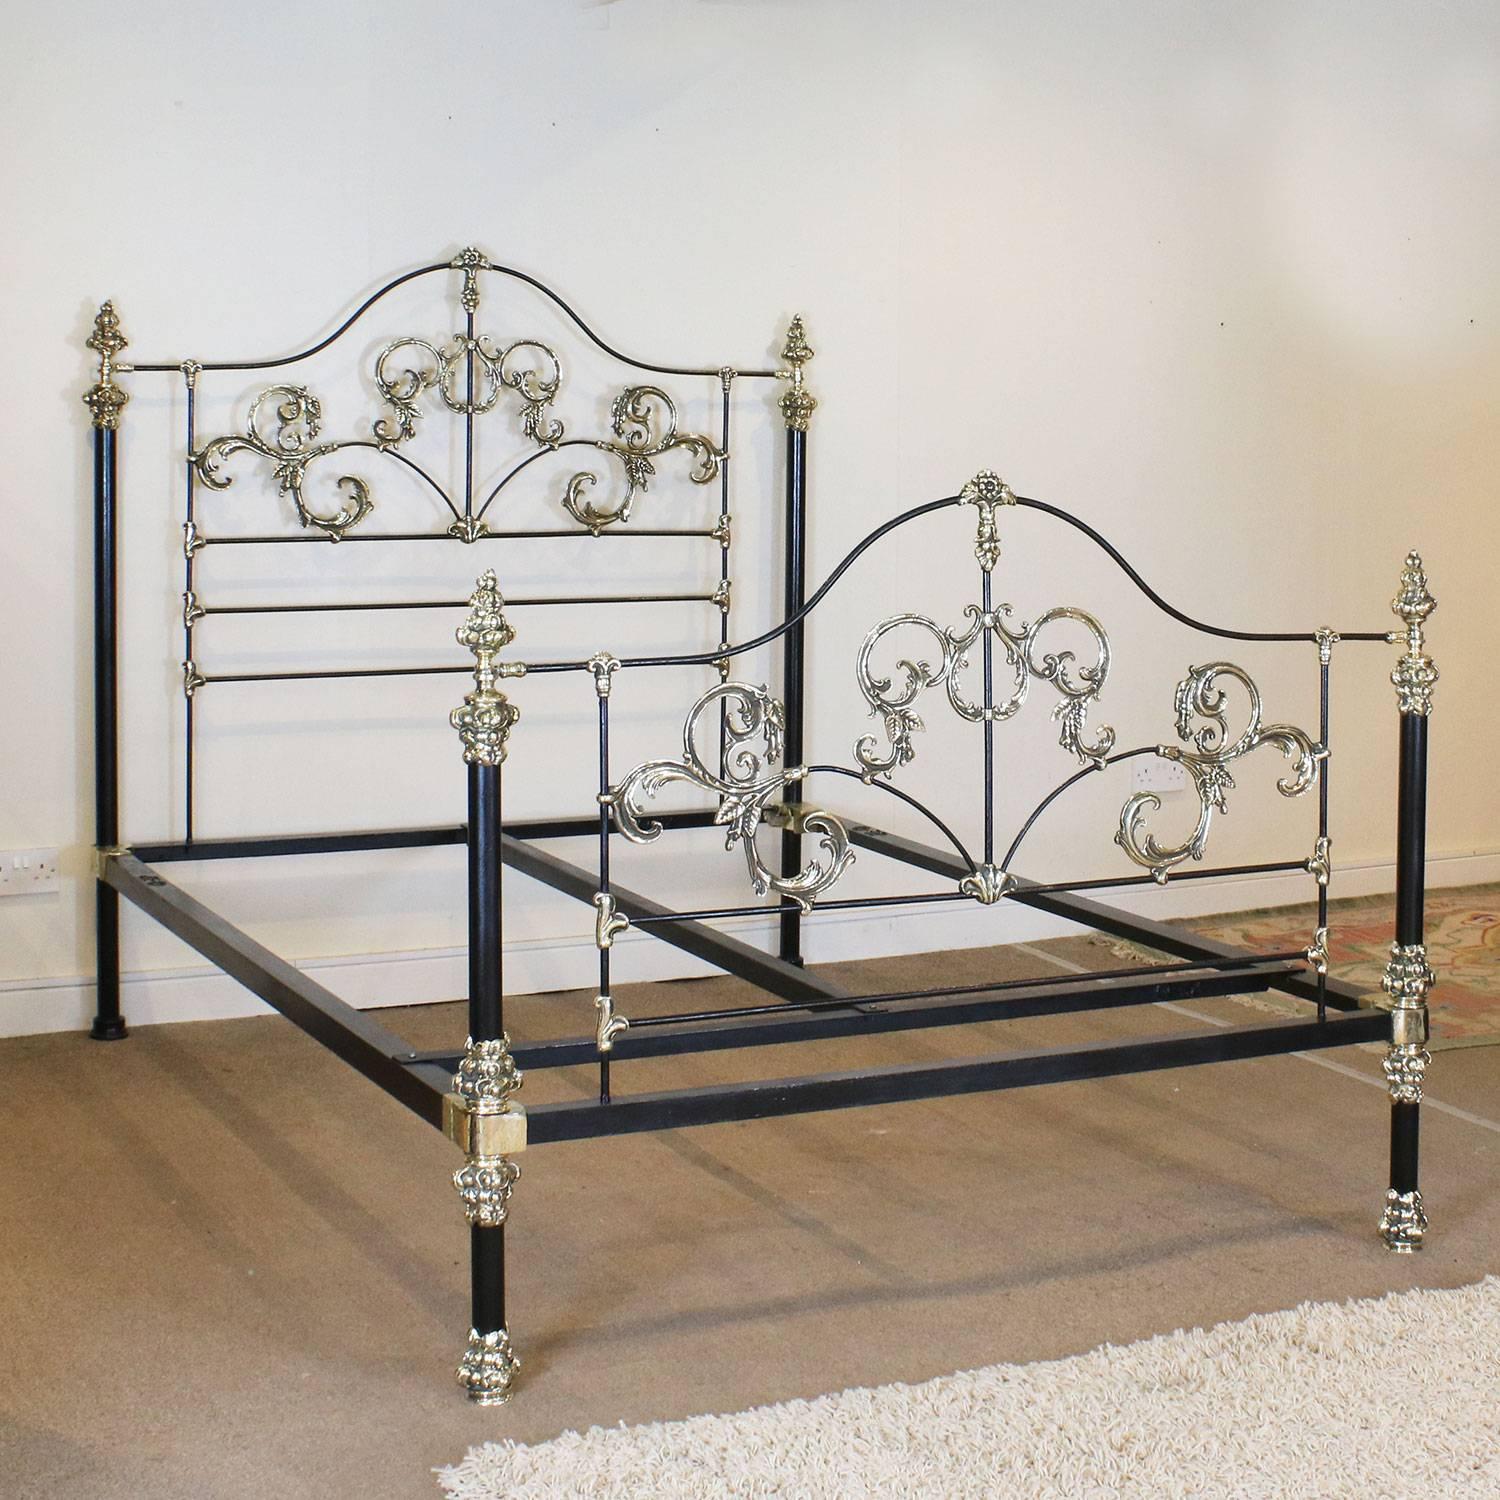 Bespoke Brass and Iron Tangier Bed - Tangier 1 1